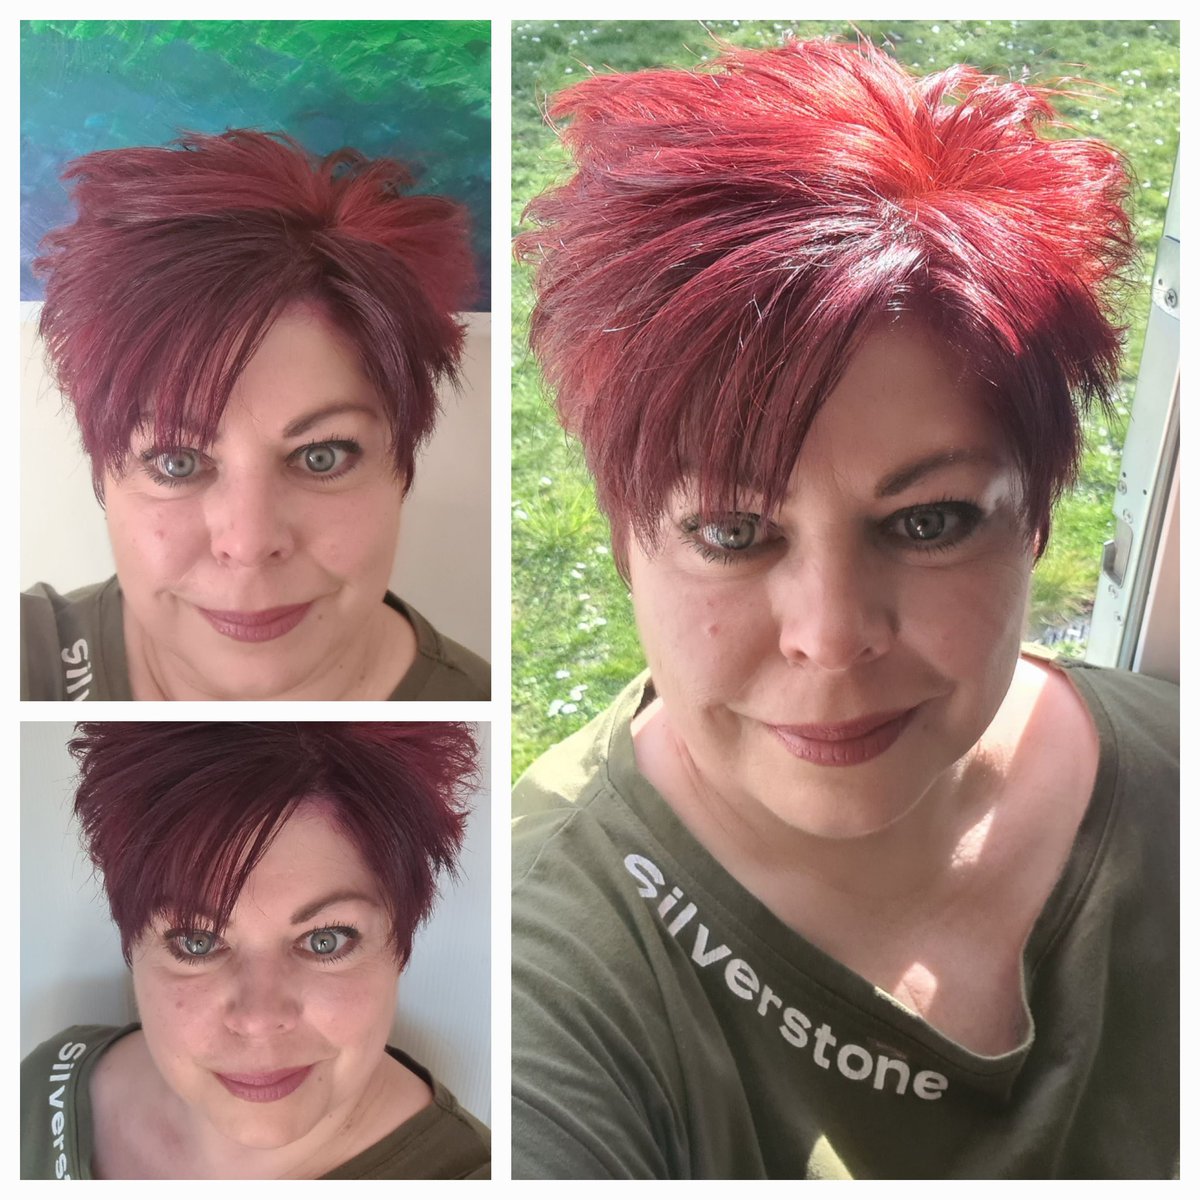 Sometimes a new hair dye (or two: red and purple) and make up is called for. Quite happy w/result. 💋💗♌️
(For those interested: Red on main w/ subtle purple on fringe). #SelfCare #RedHair #Over50sStyle #ColourDressing #PowerDressingThruHair #RedIsRad #PowerDressing #Confidence